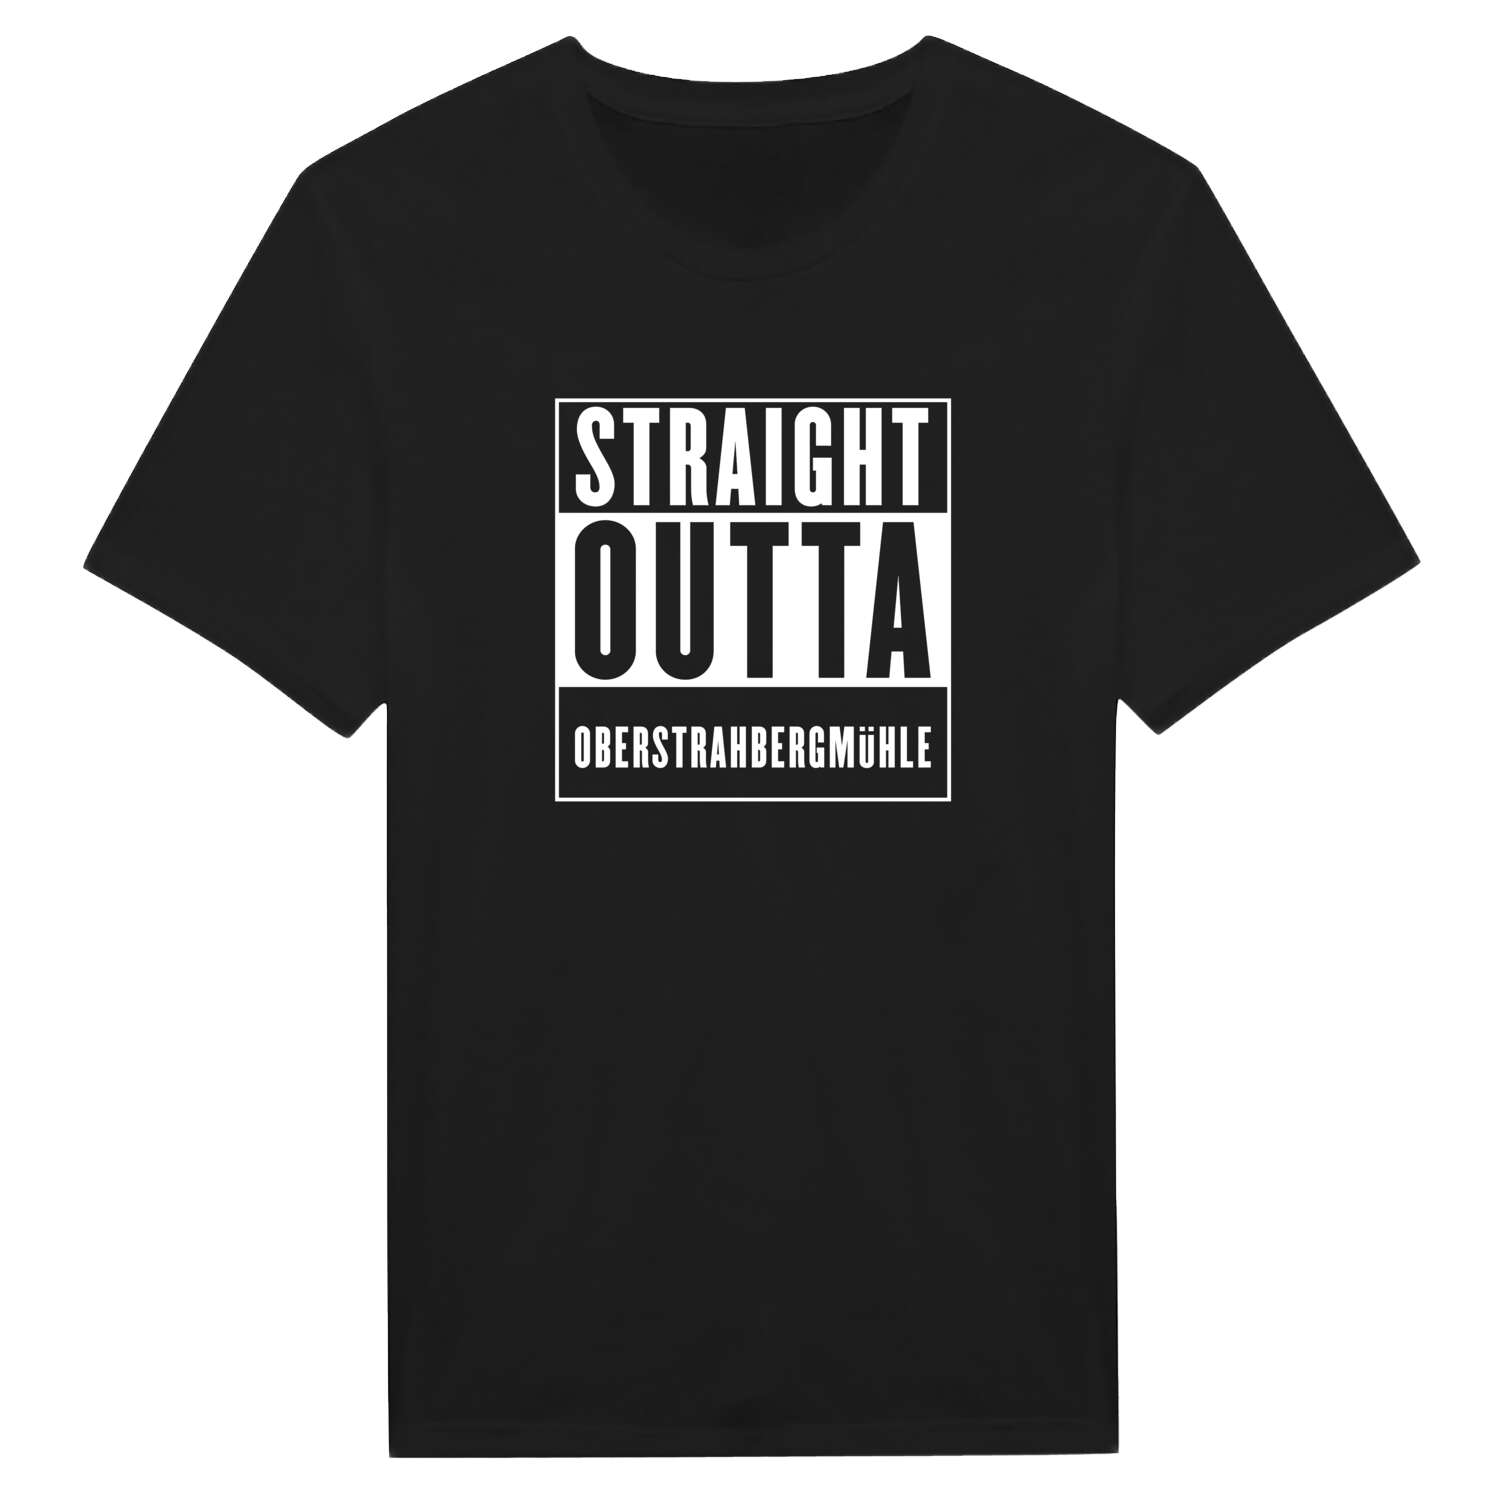 Oberstrahbergmühle T-Shirt »Straight Outta«